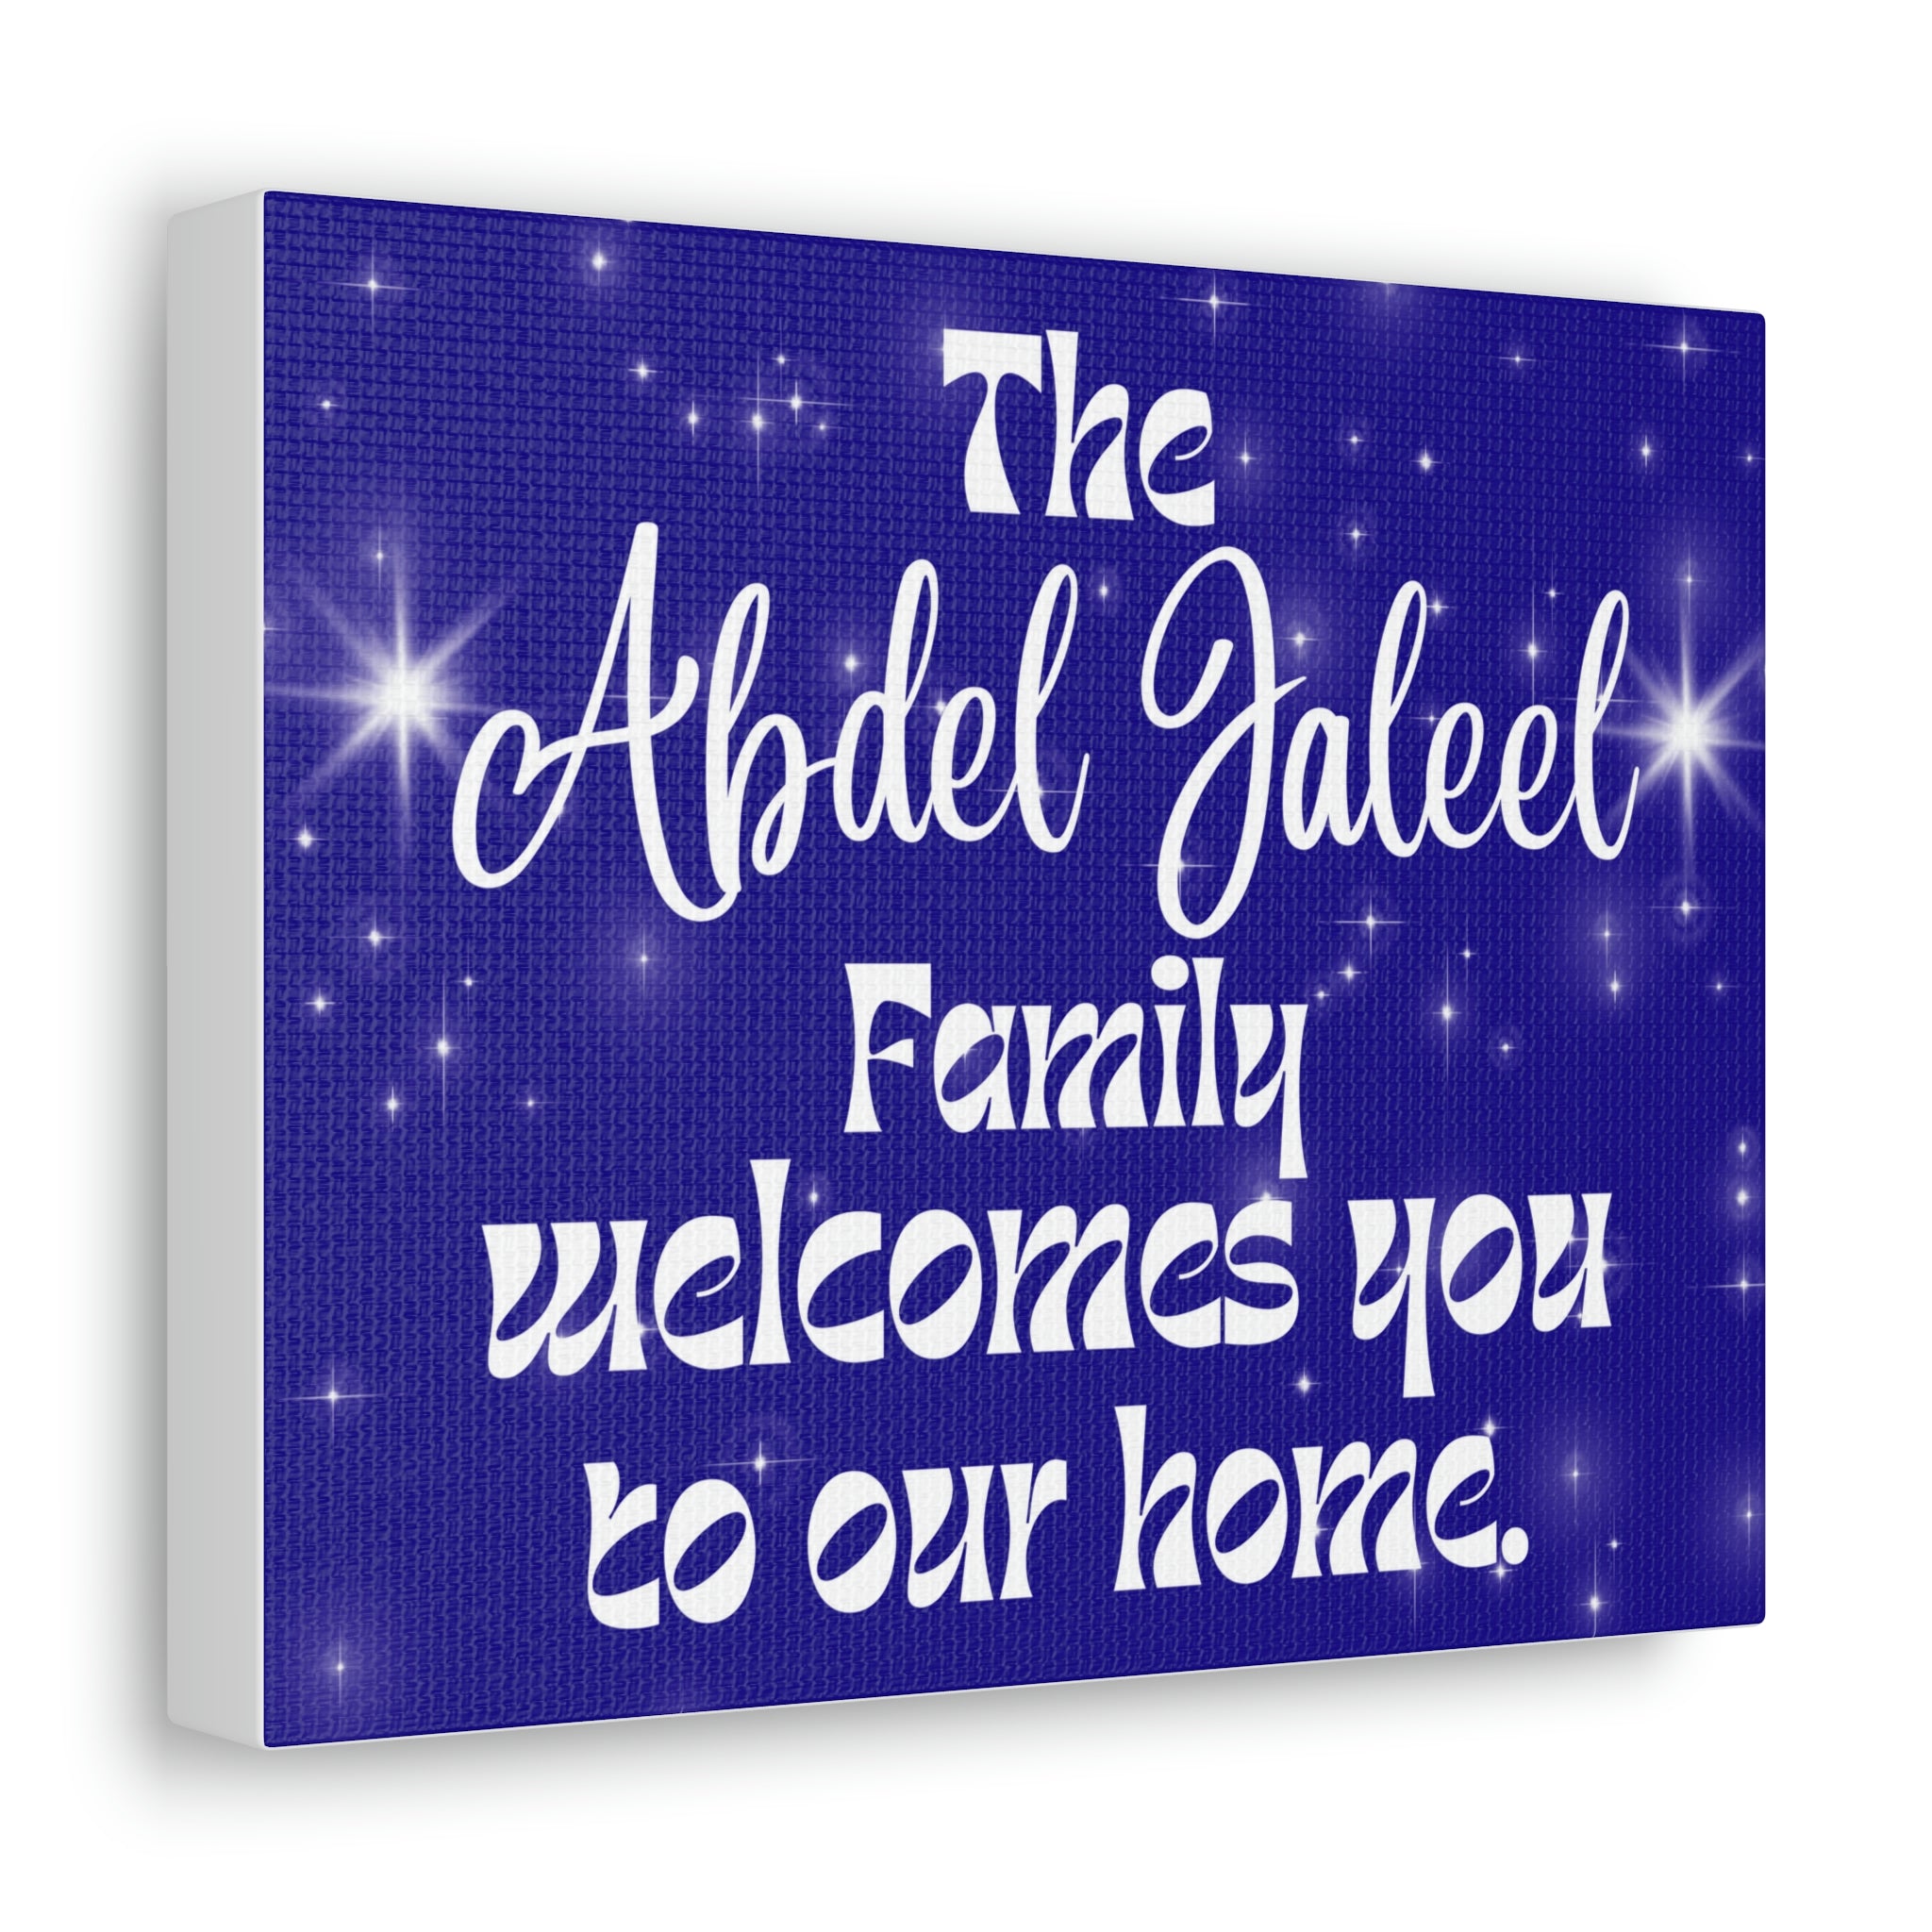 The "    "  Family welcome to our home. 10" x 8" Canvas Gallery Wraps (If you'd like another color or have different wording please just let me know)